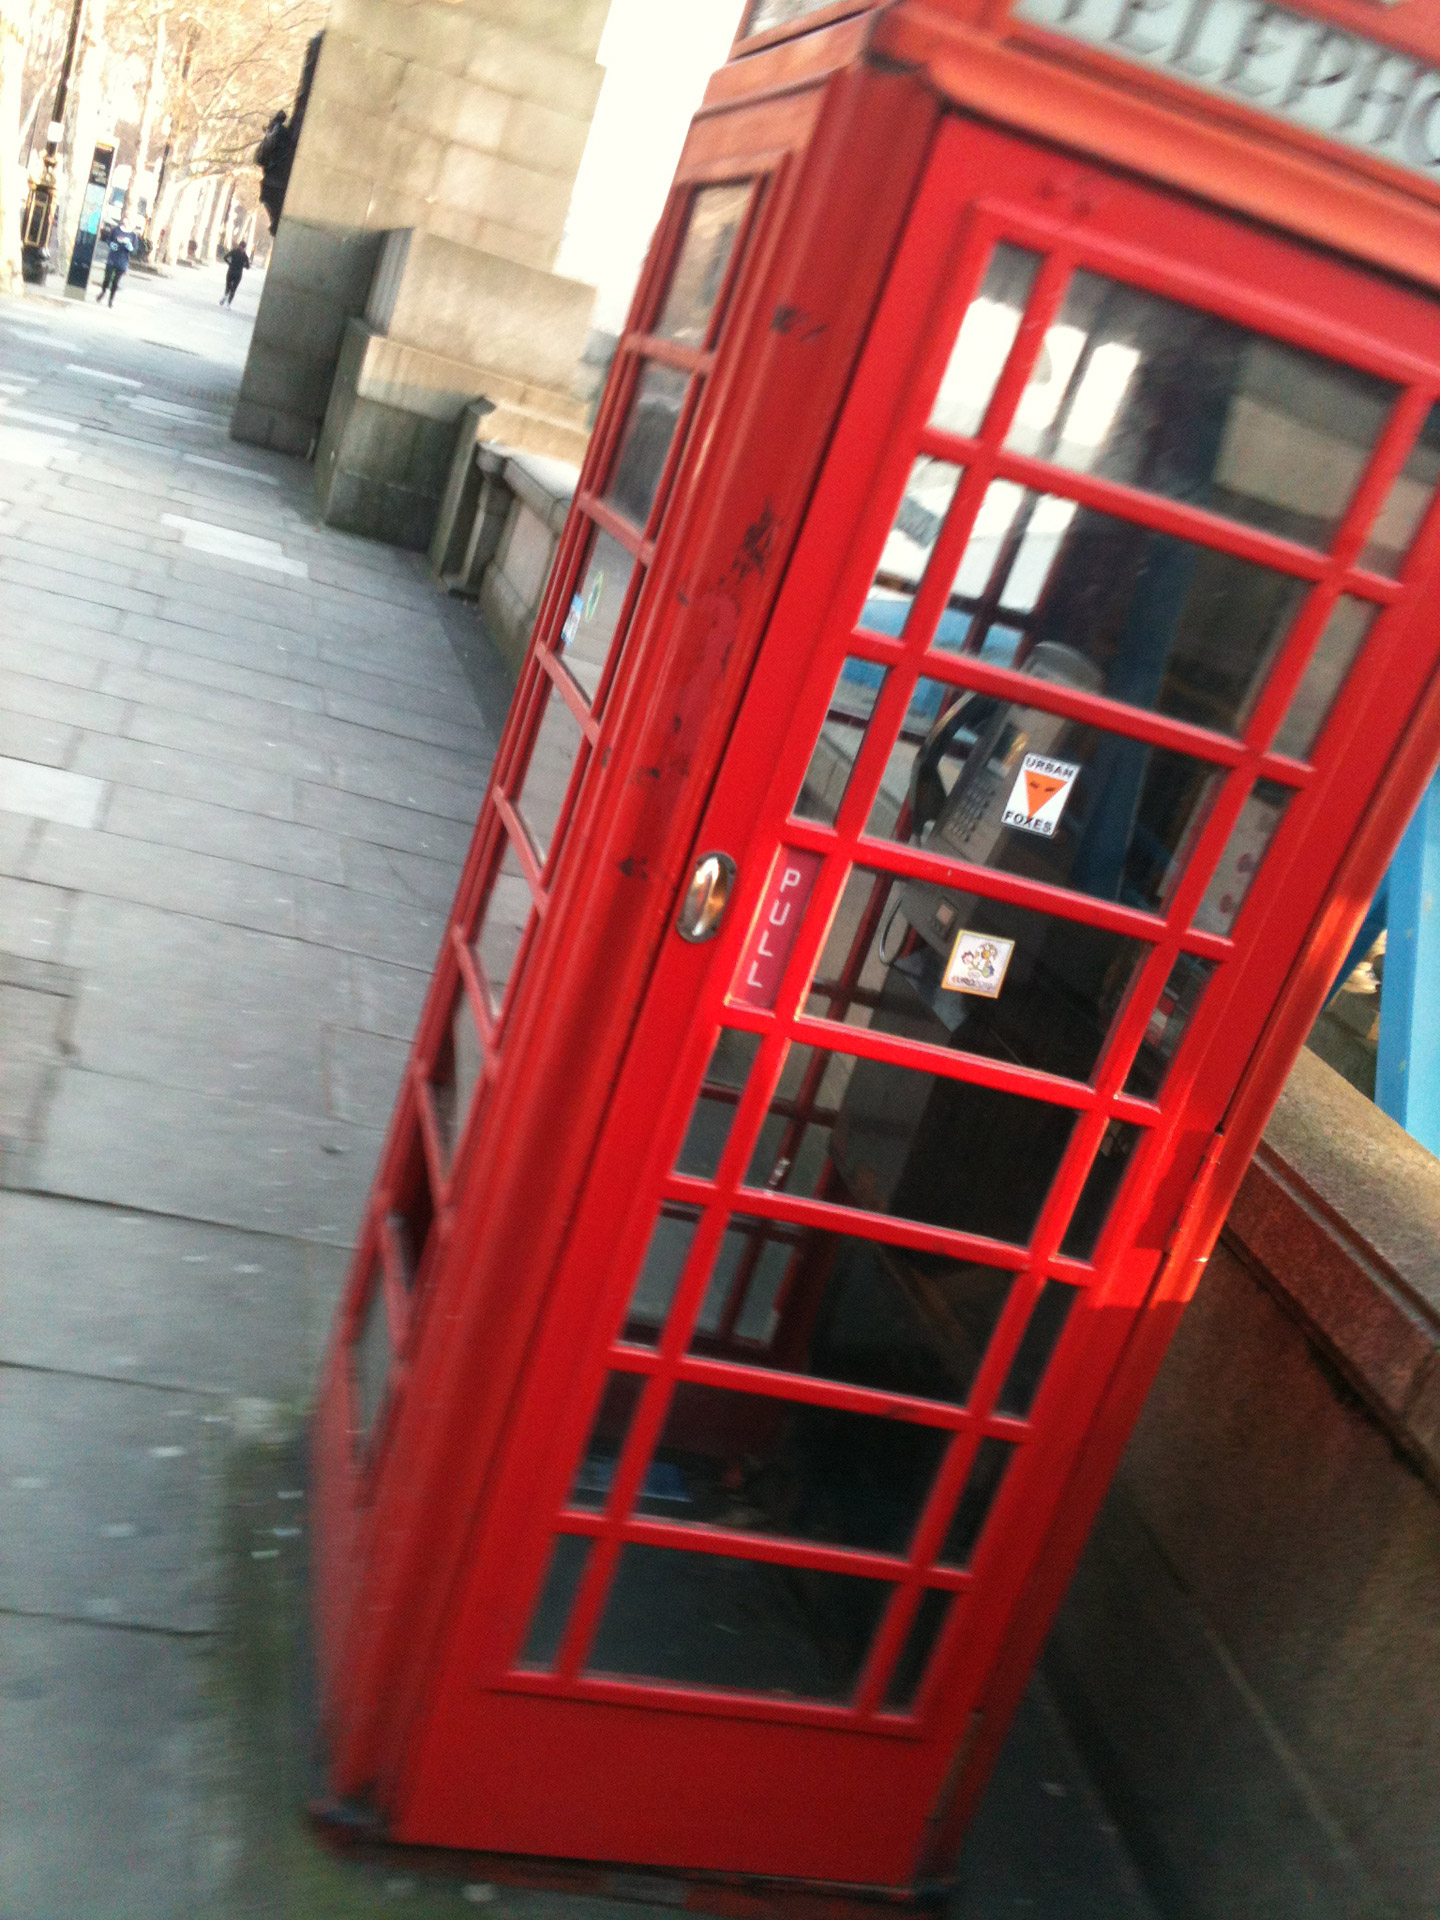 A Red telephone box next to the river Thames